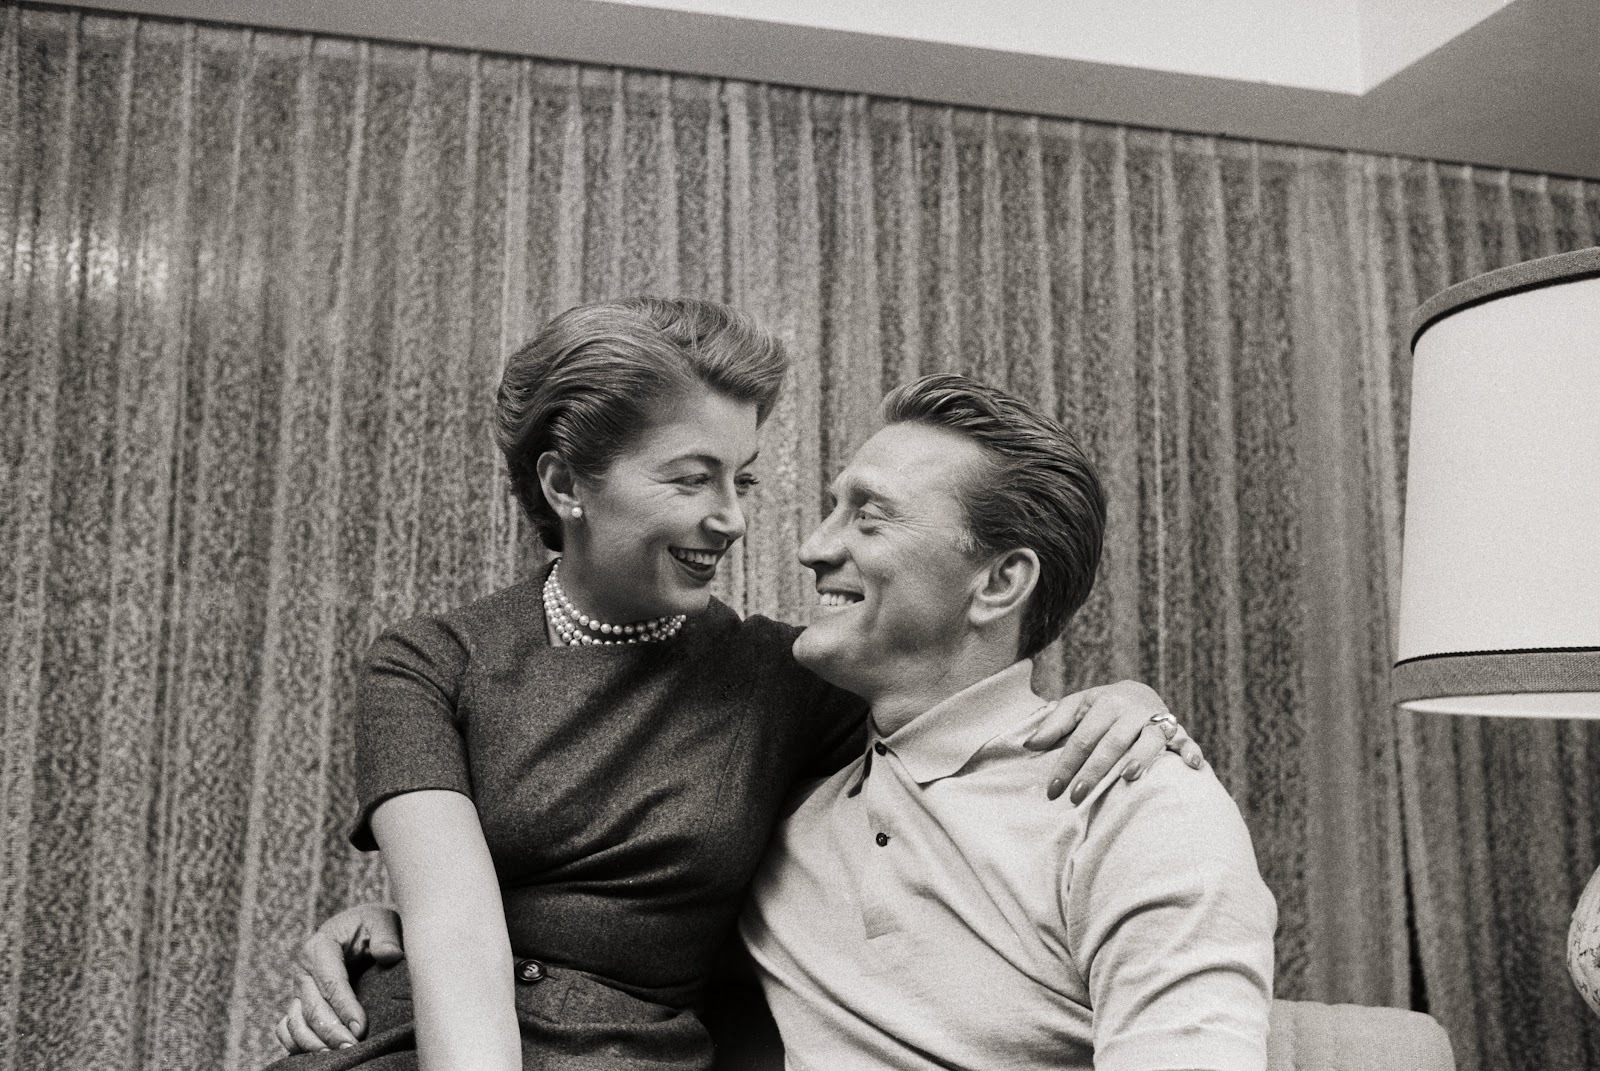 Kirk Douglas and Anne Buydens celebrating the actors nomination for an academy award in 1957. | Source: Getty Images